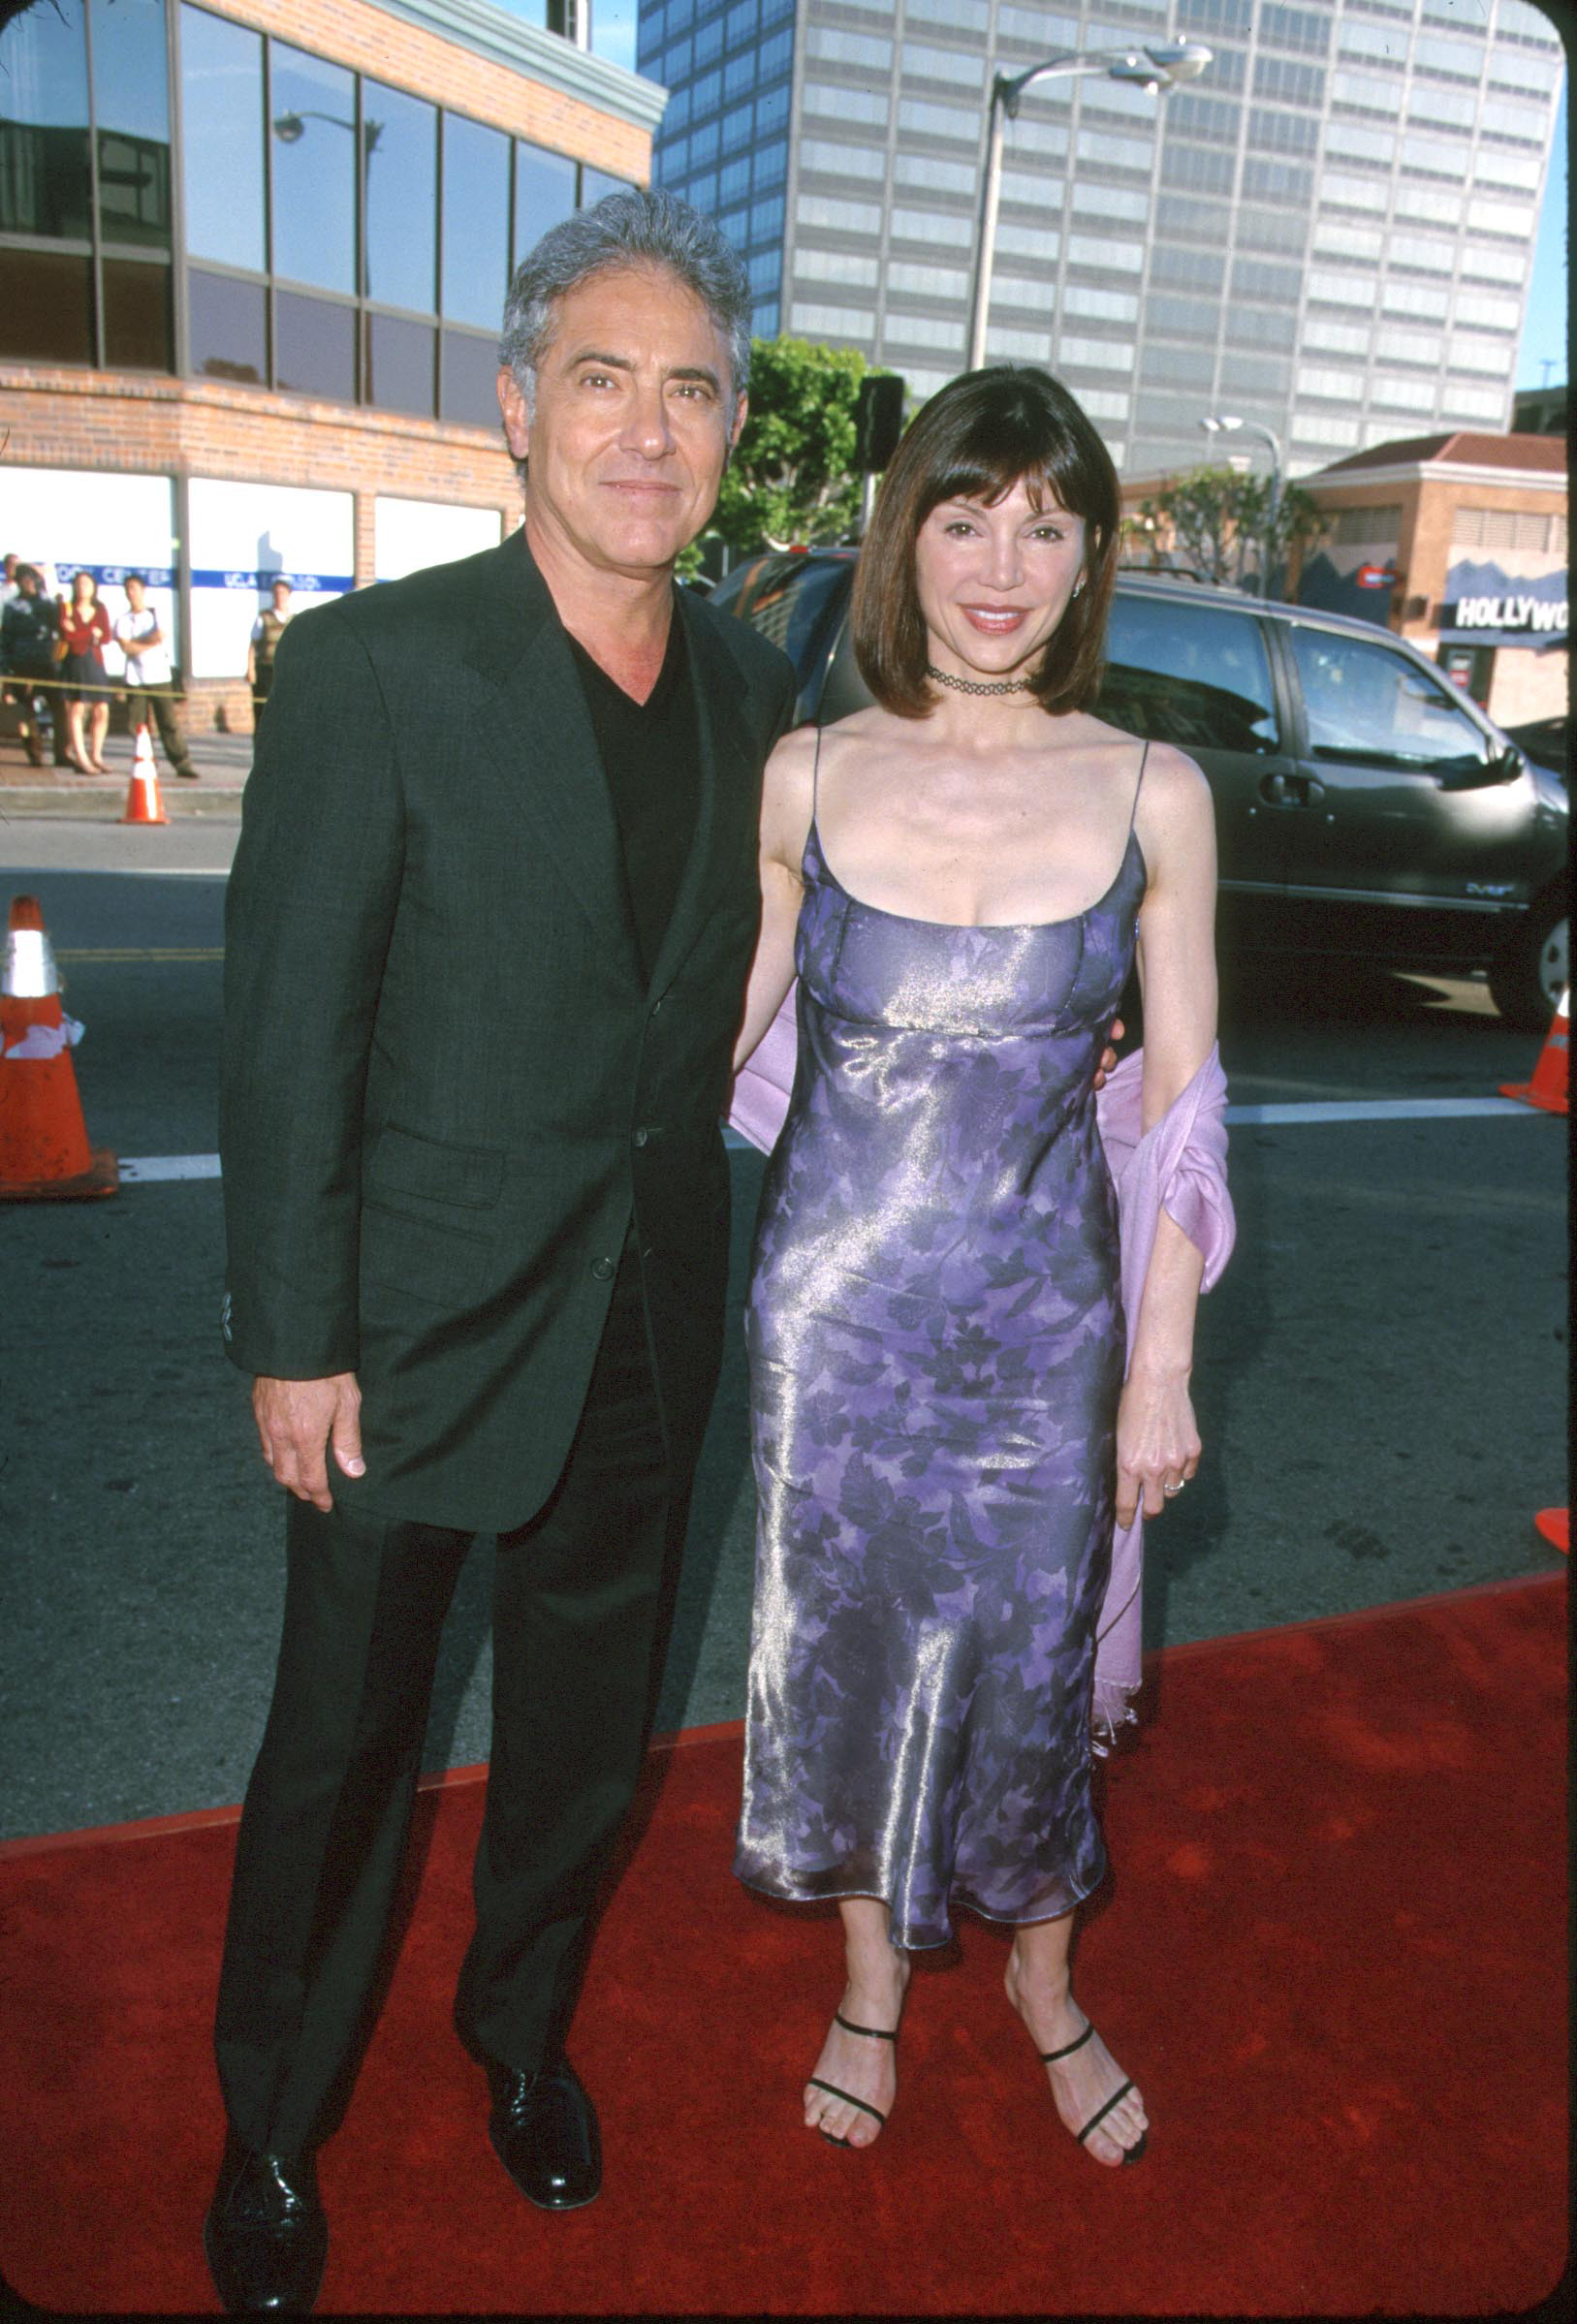 Victoria Principal and Harry Glassman at the premiere of "The General's Daughter" in Los Angeles, California on June 15, 1999 | Source: Getty Images